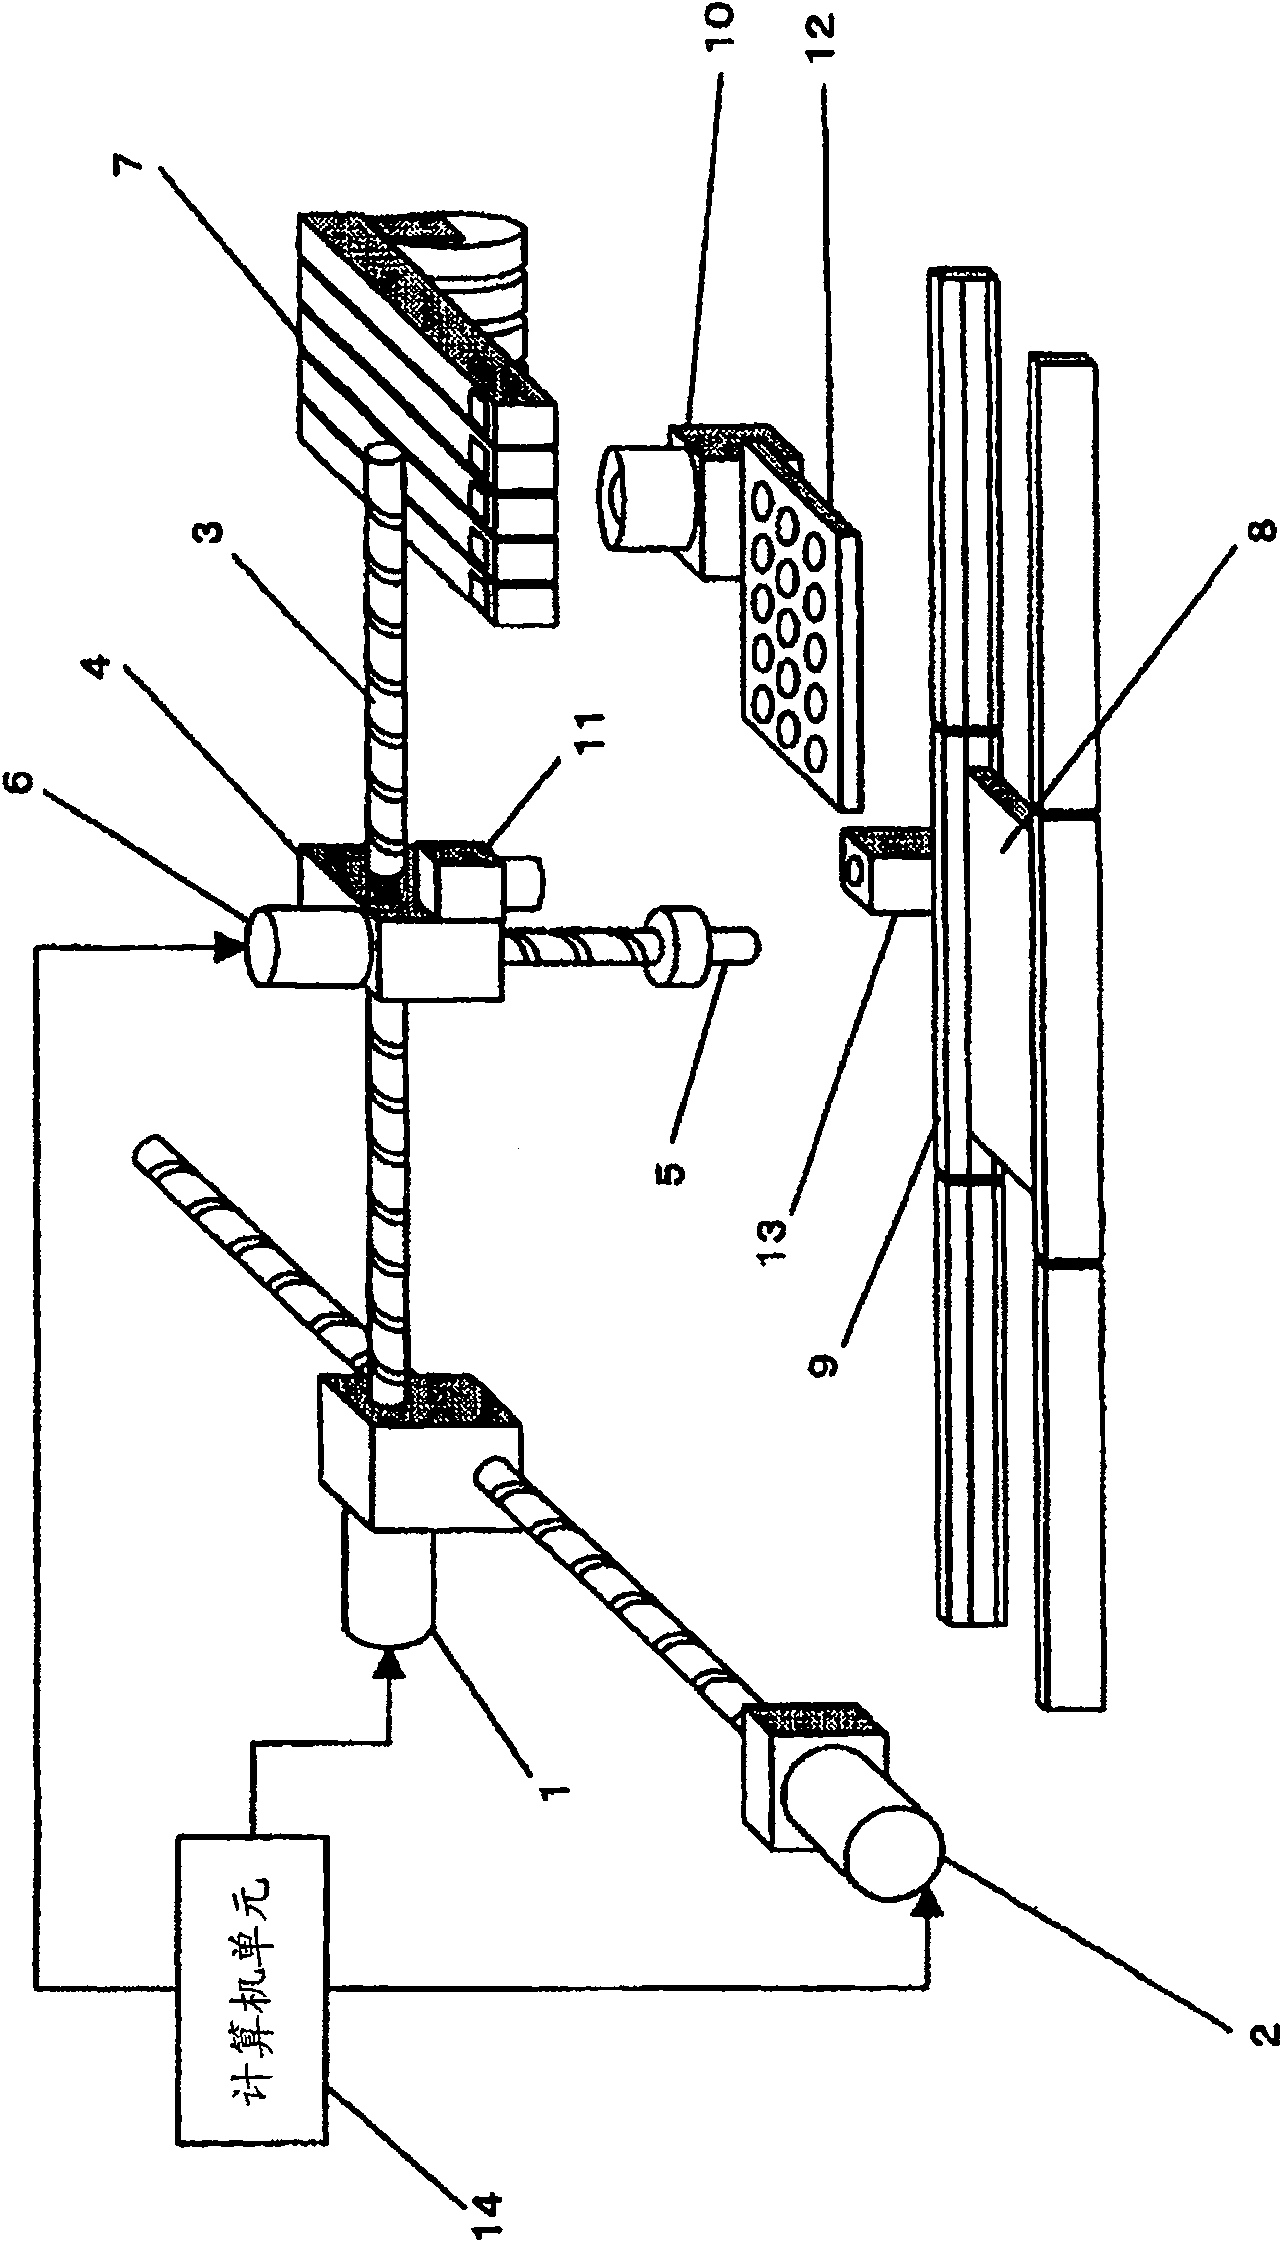 Device for mounting part